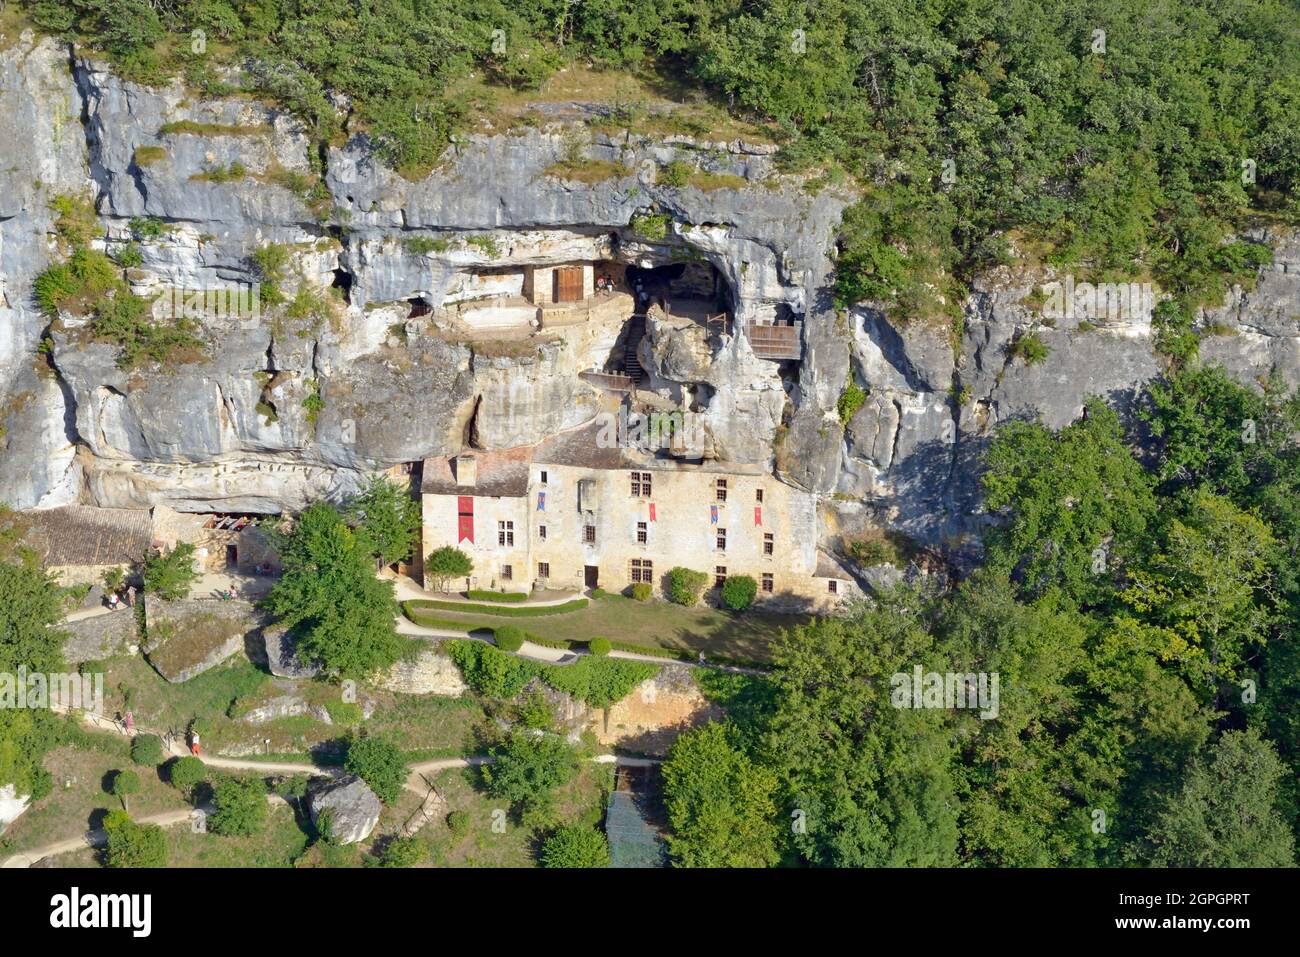 France, Dordogne, Perigord Noir, Vezere Valley, prehistoric site and decorated cave listed as World Heritage by UNESCO, Tursac, 16th century Reignac troglodytic and fortified house Stock Photo